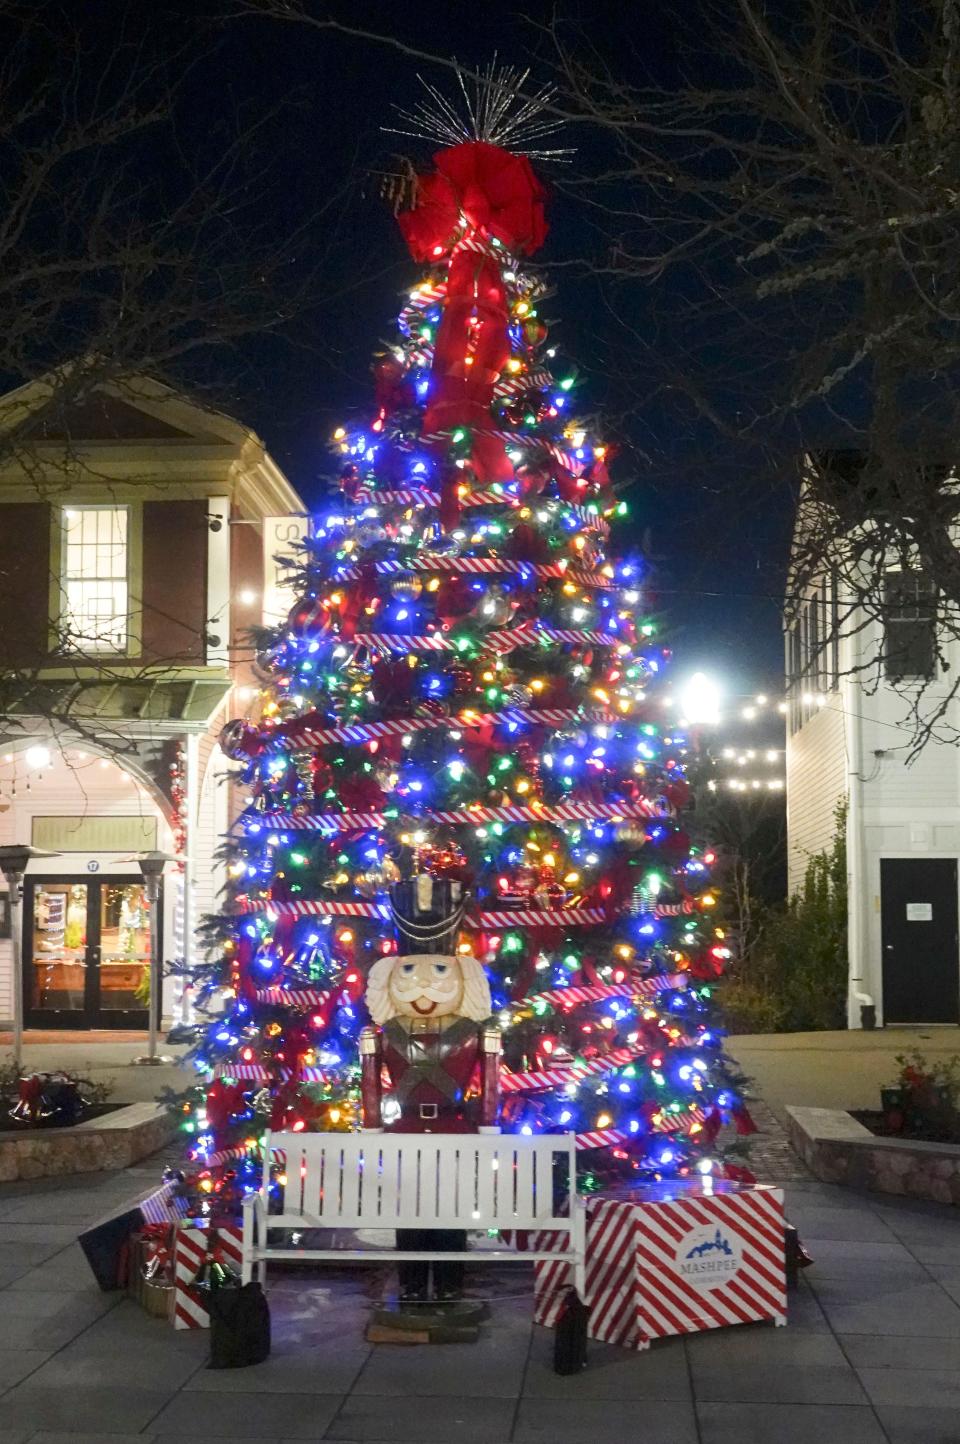 The Christmas tree at Mashpee Commons for December 2023.